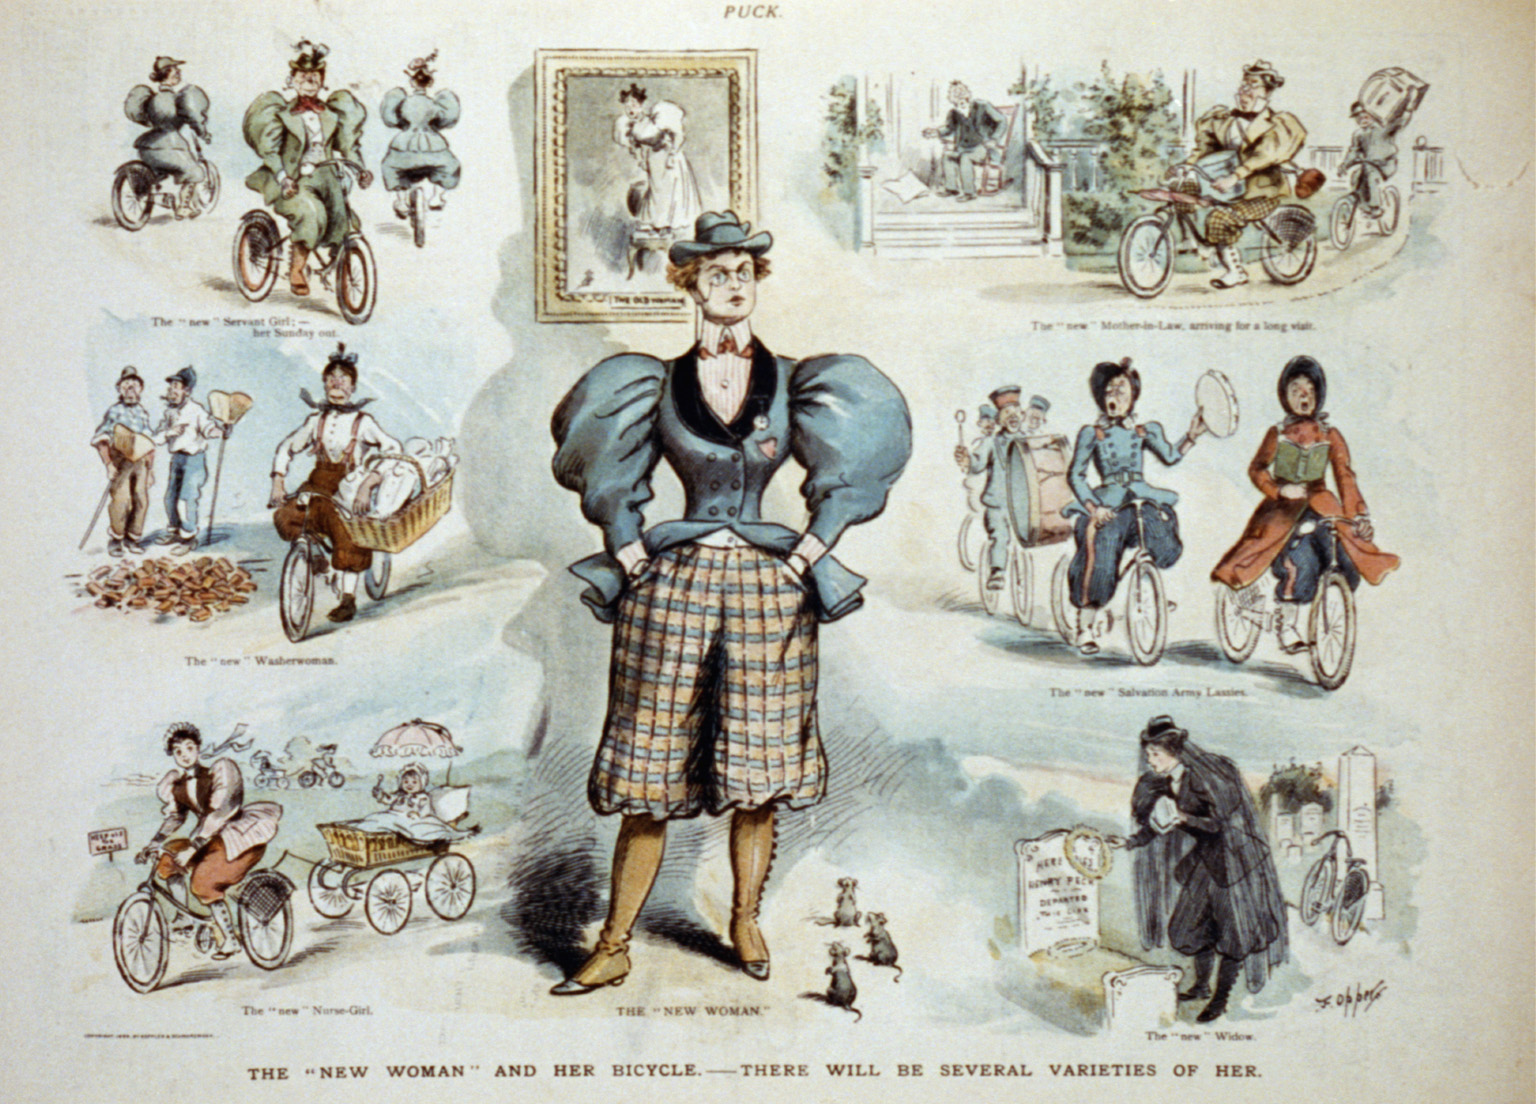 A Puck Illustration showing various caricatures of women on bicycles. 